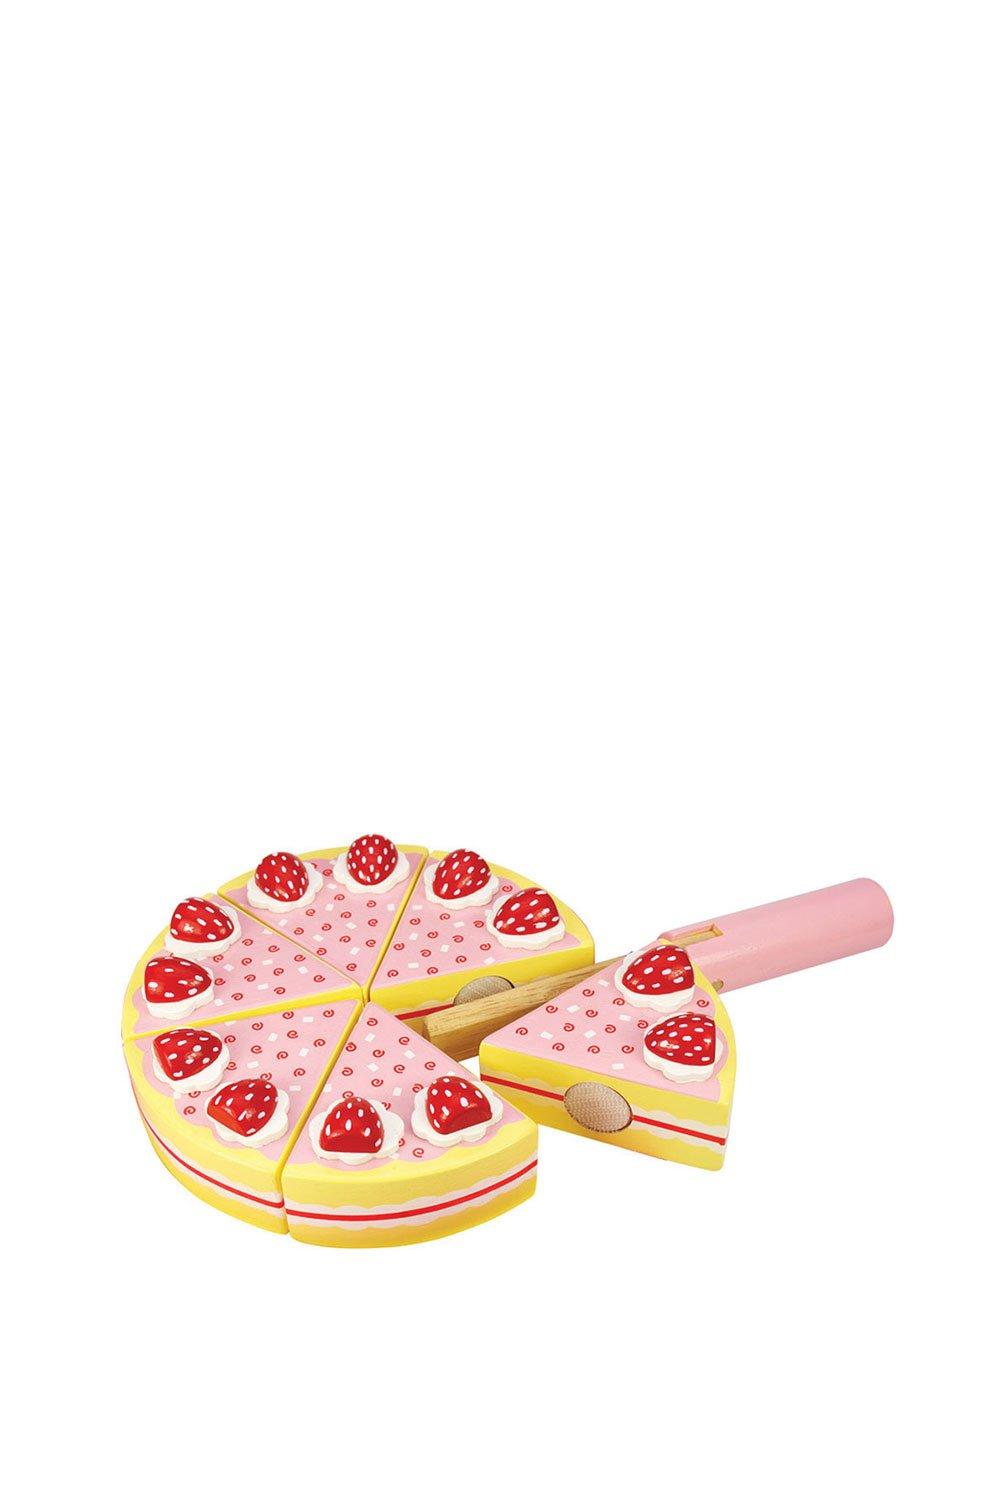 Strawberry Party Cake Toy